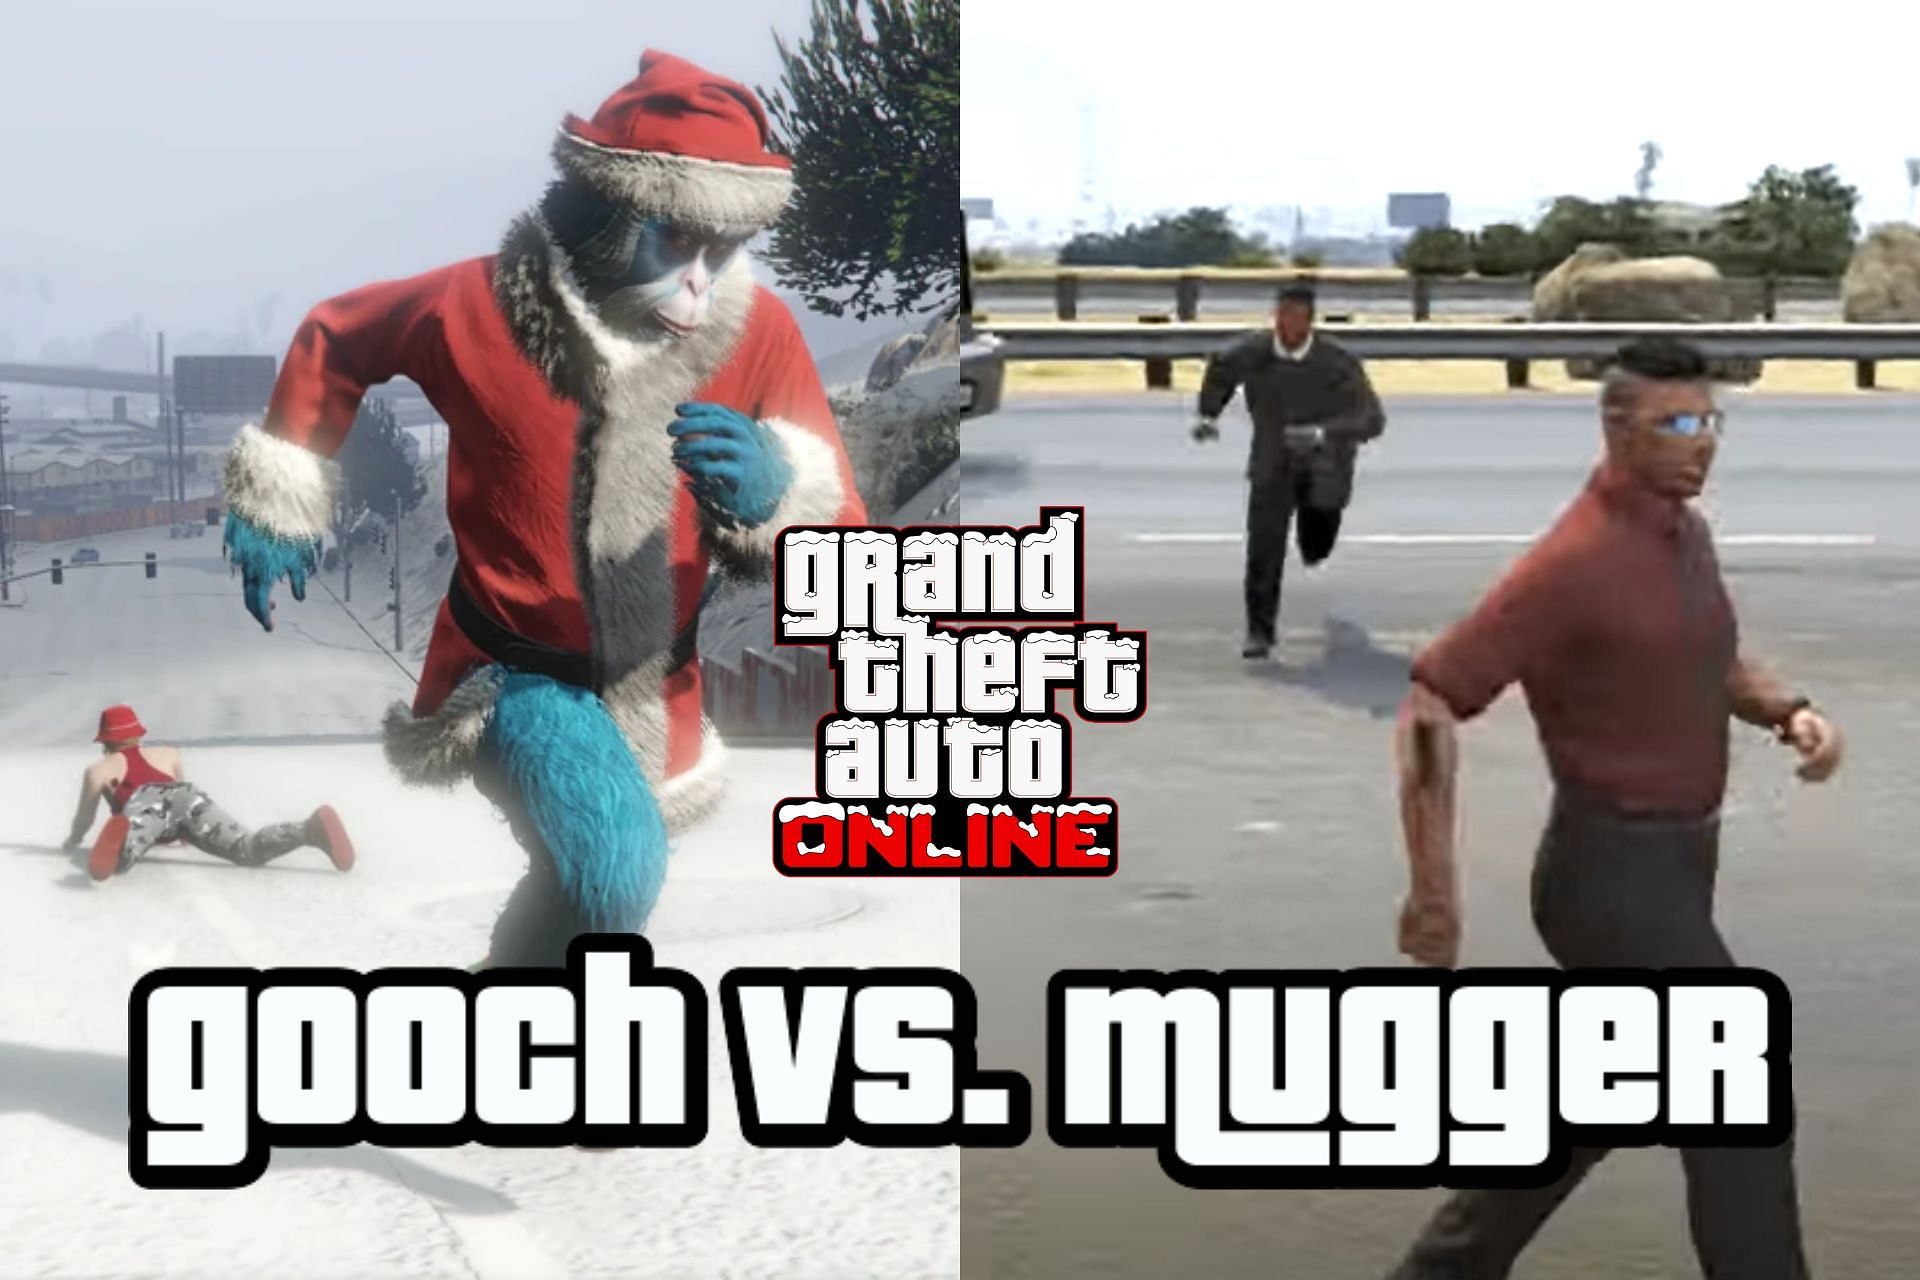 What distinguishes The Gooch from the Mugger in GTA Online? (Image via Sportskeeda)